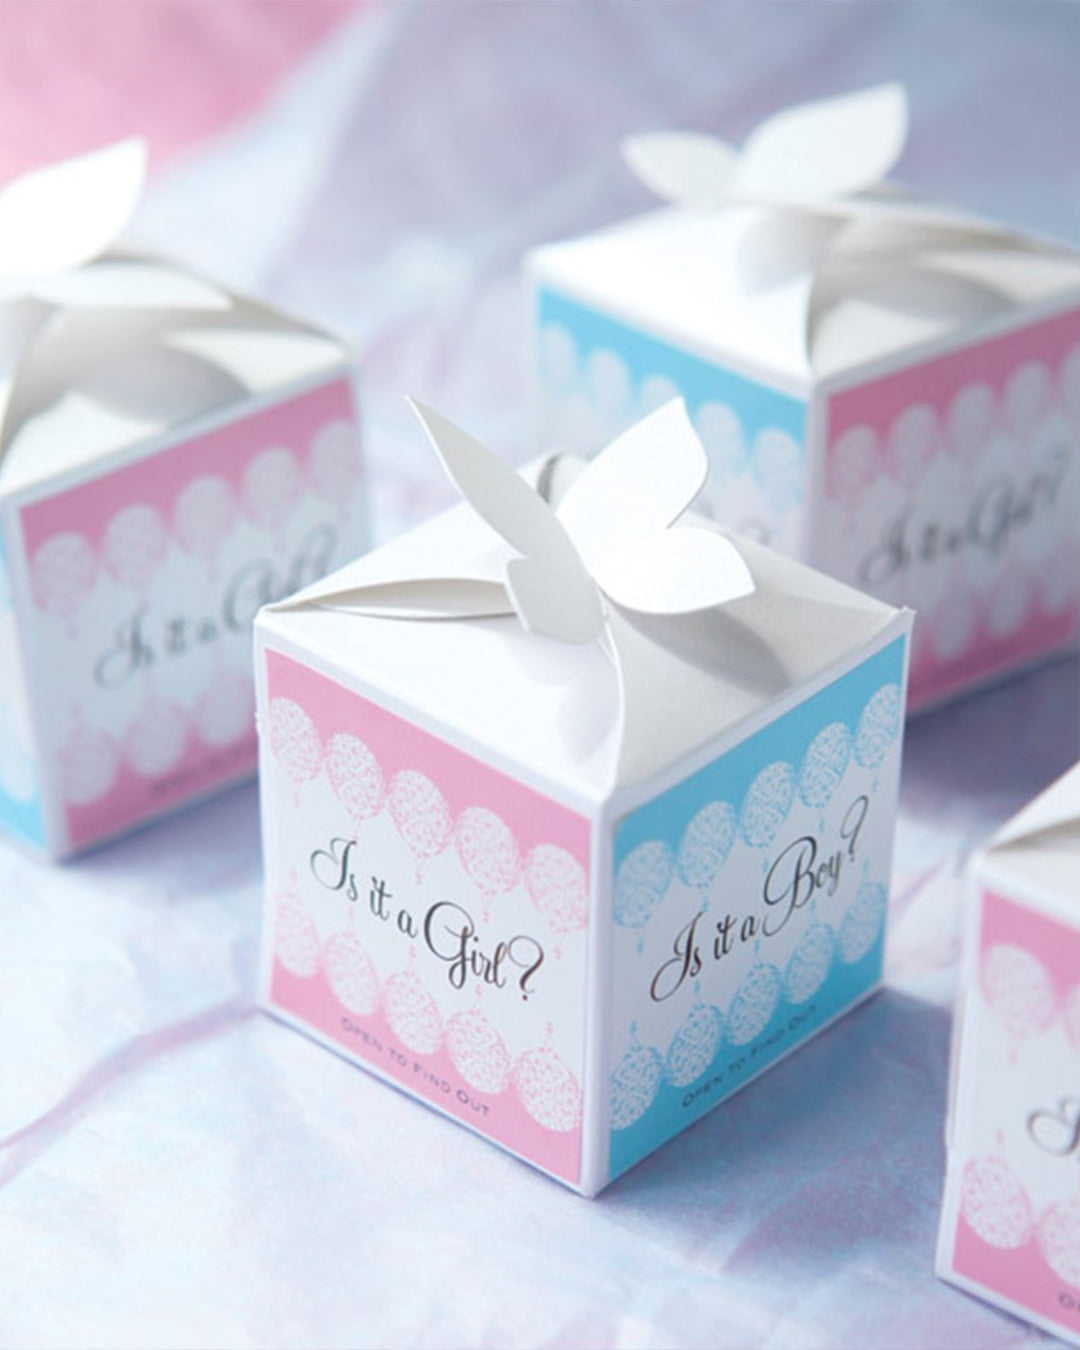 Do you take a gift to a gender reveal party